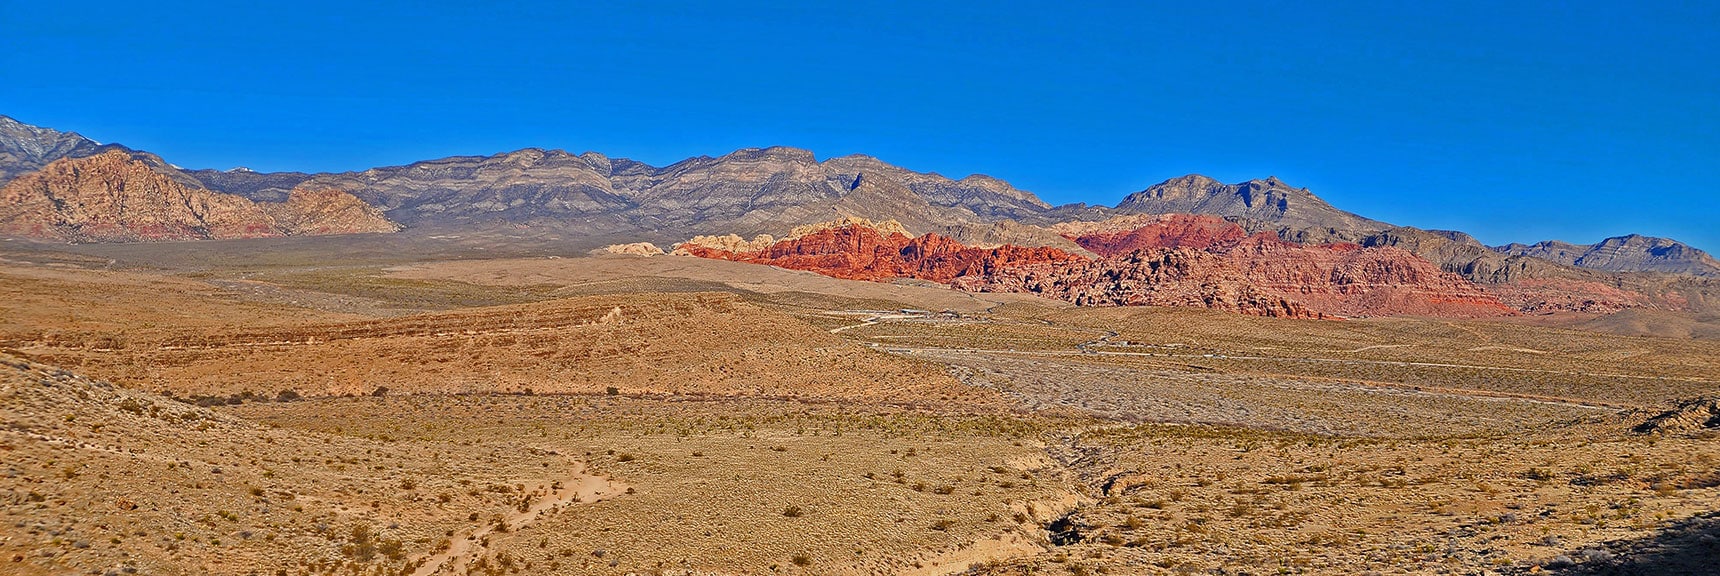 Red Rock Canyon View While Ascending Bomb Voyage/Muffin Trail | Eastern Outer Circuit | Blue Diamond Hill | Red Rock Canyon, Nevada